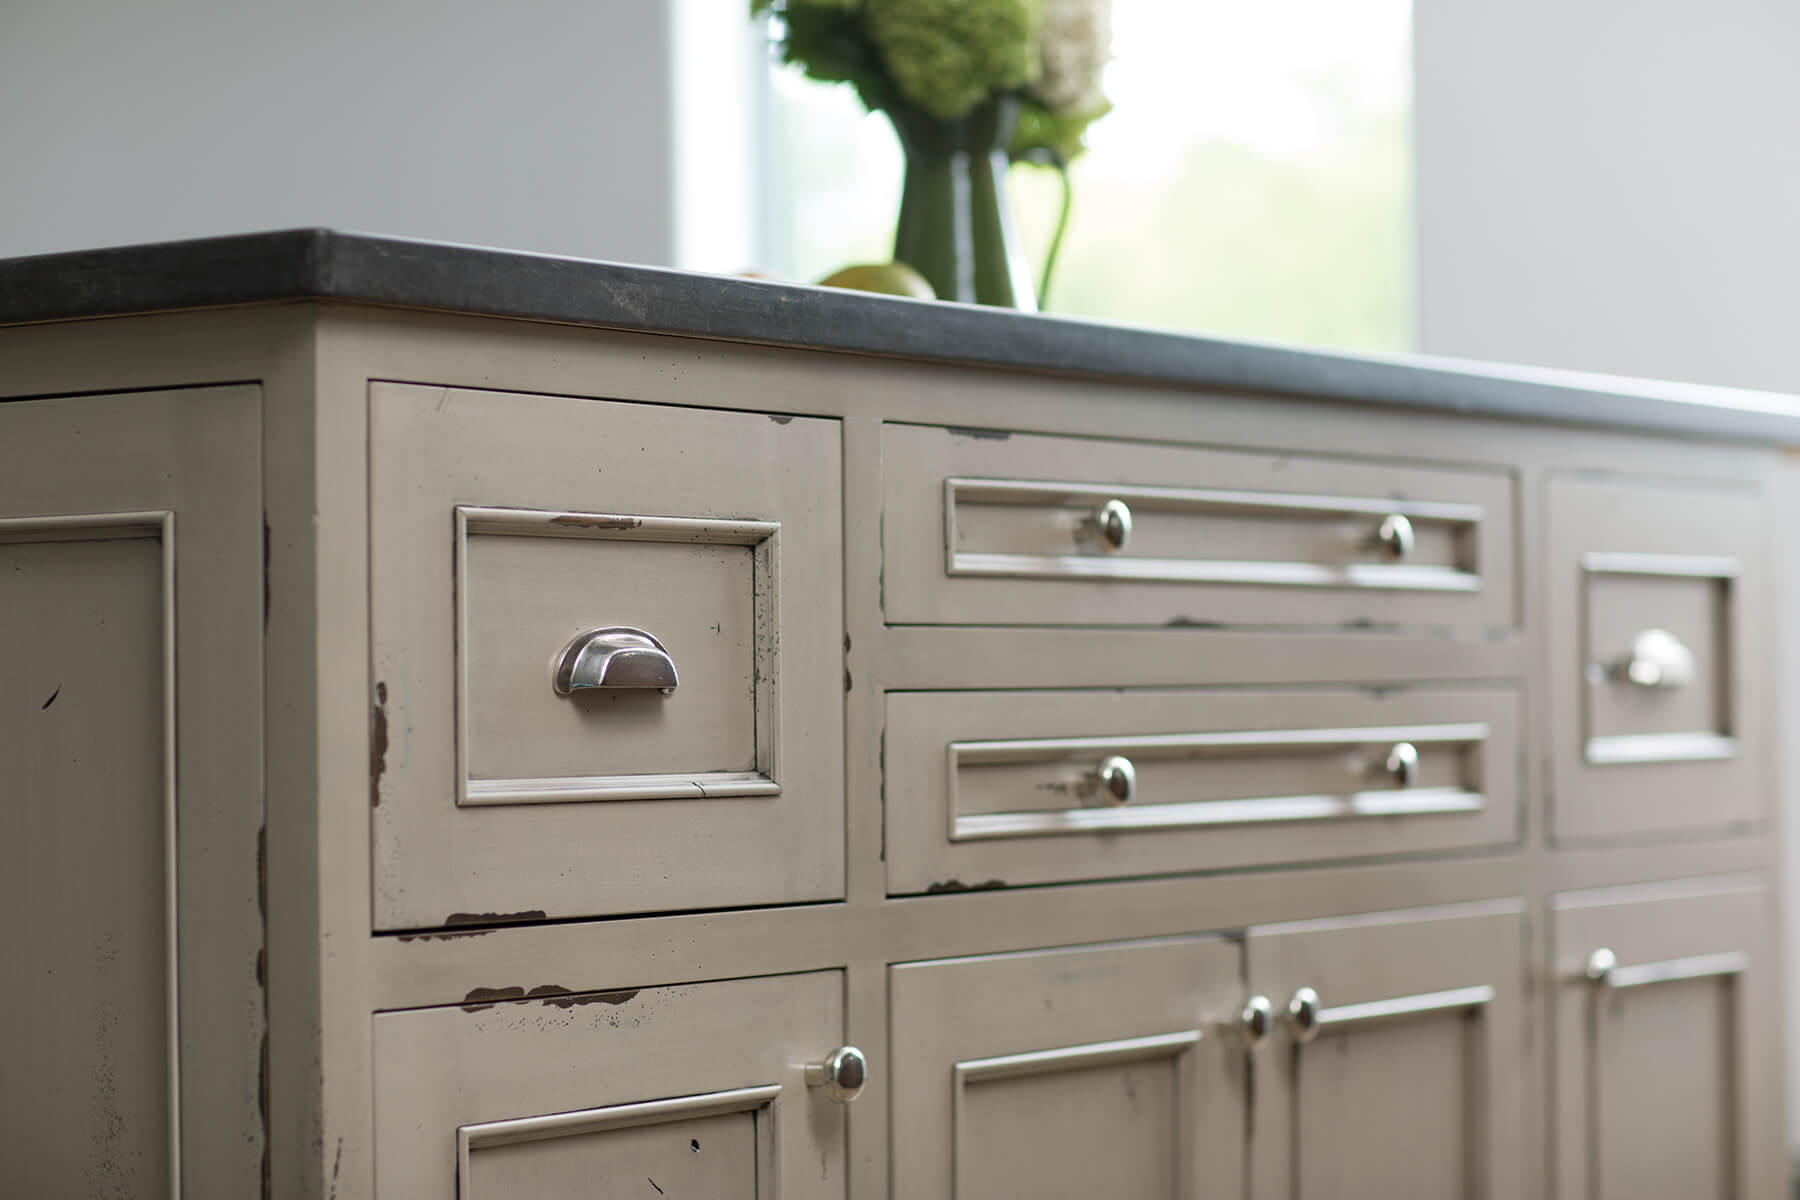 A kitchen island with a beautiful distressed paint finish with Dura Supreme's Heritage Paint finish.